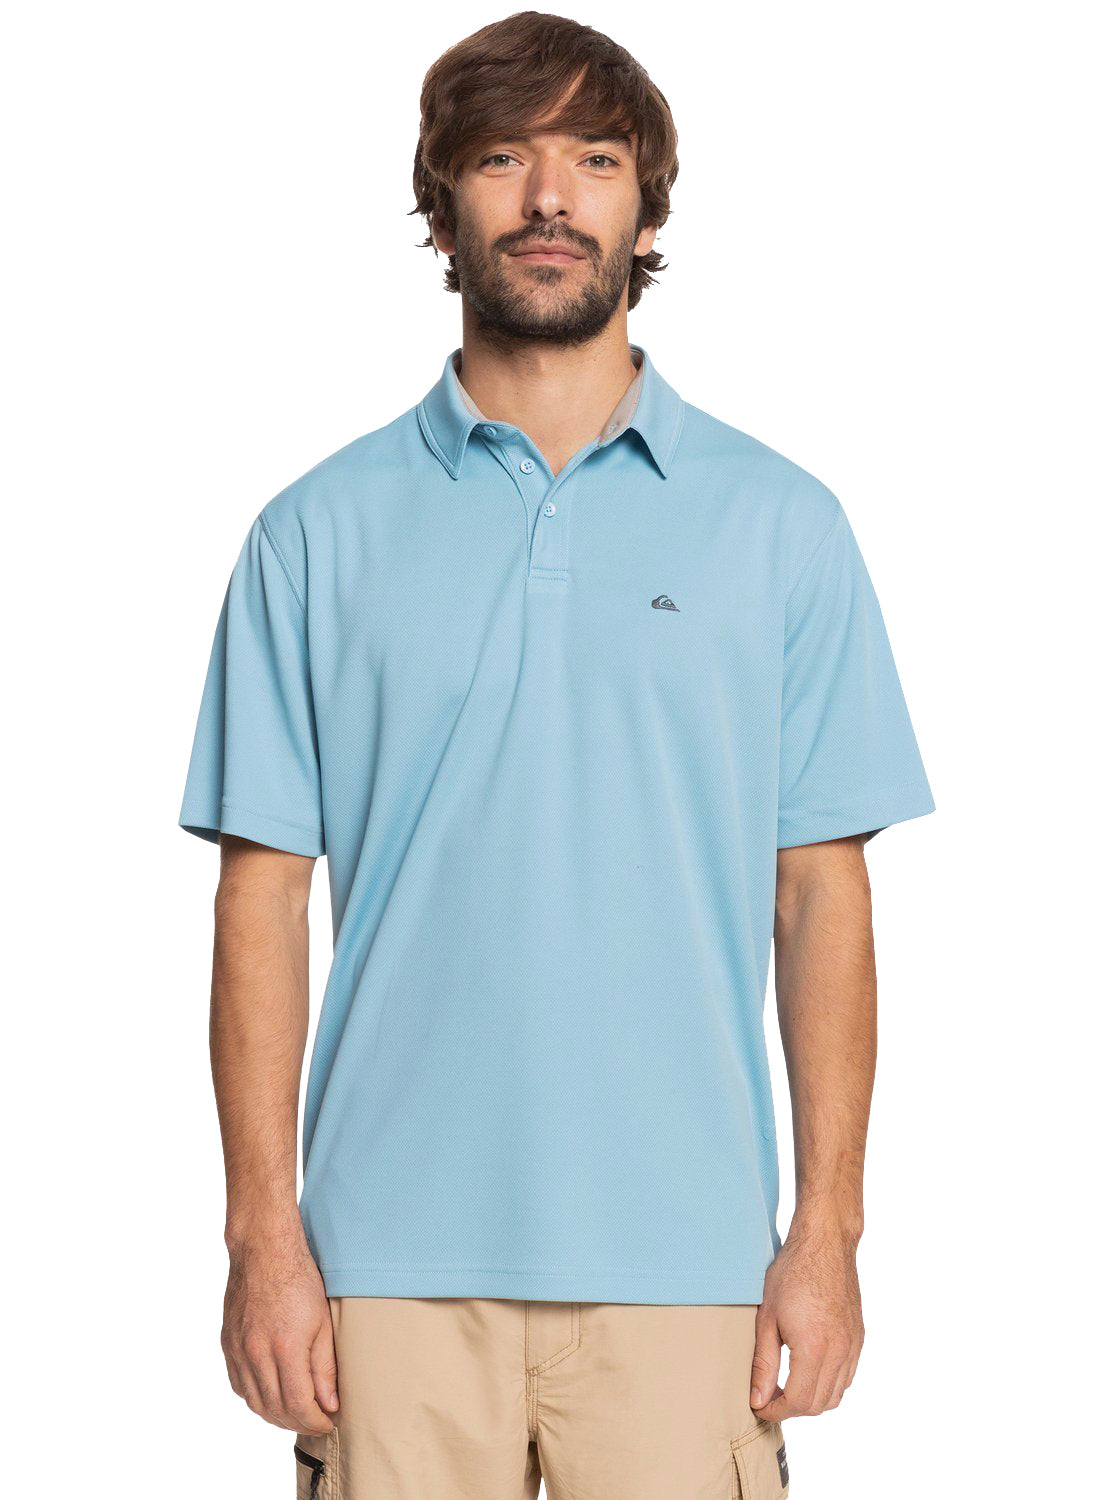 Quiksilver Waterman Water 2 Polo BHC0 XL